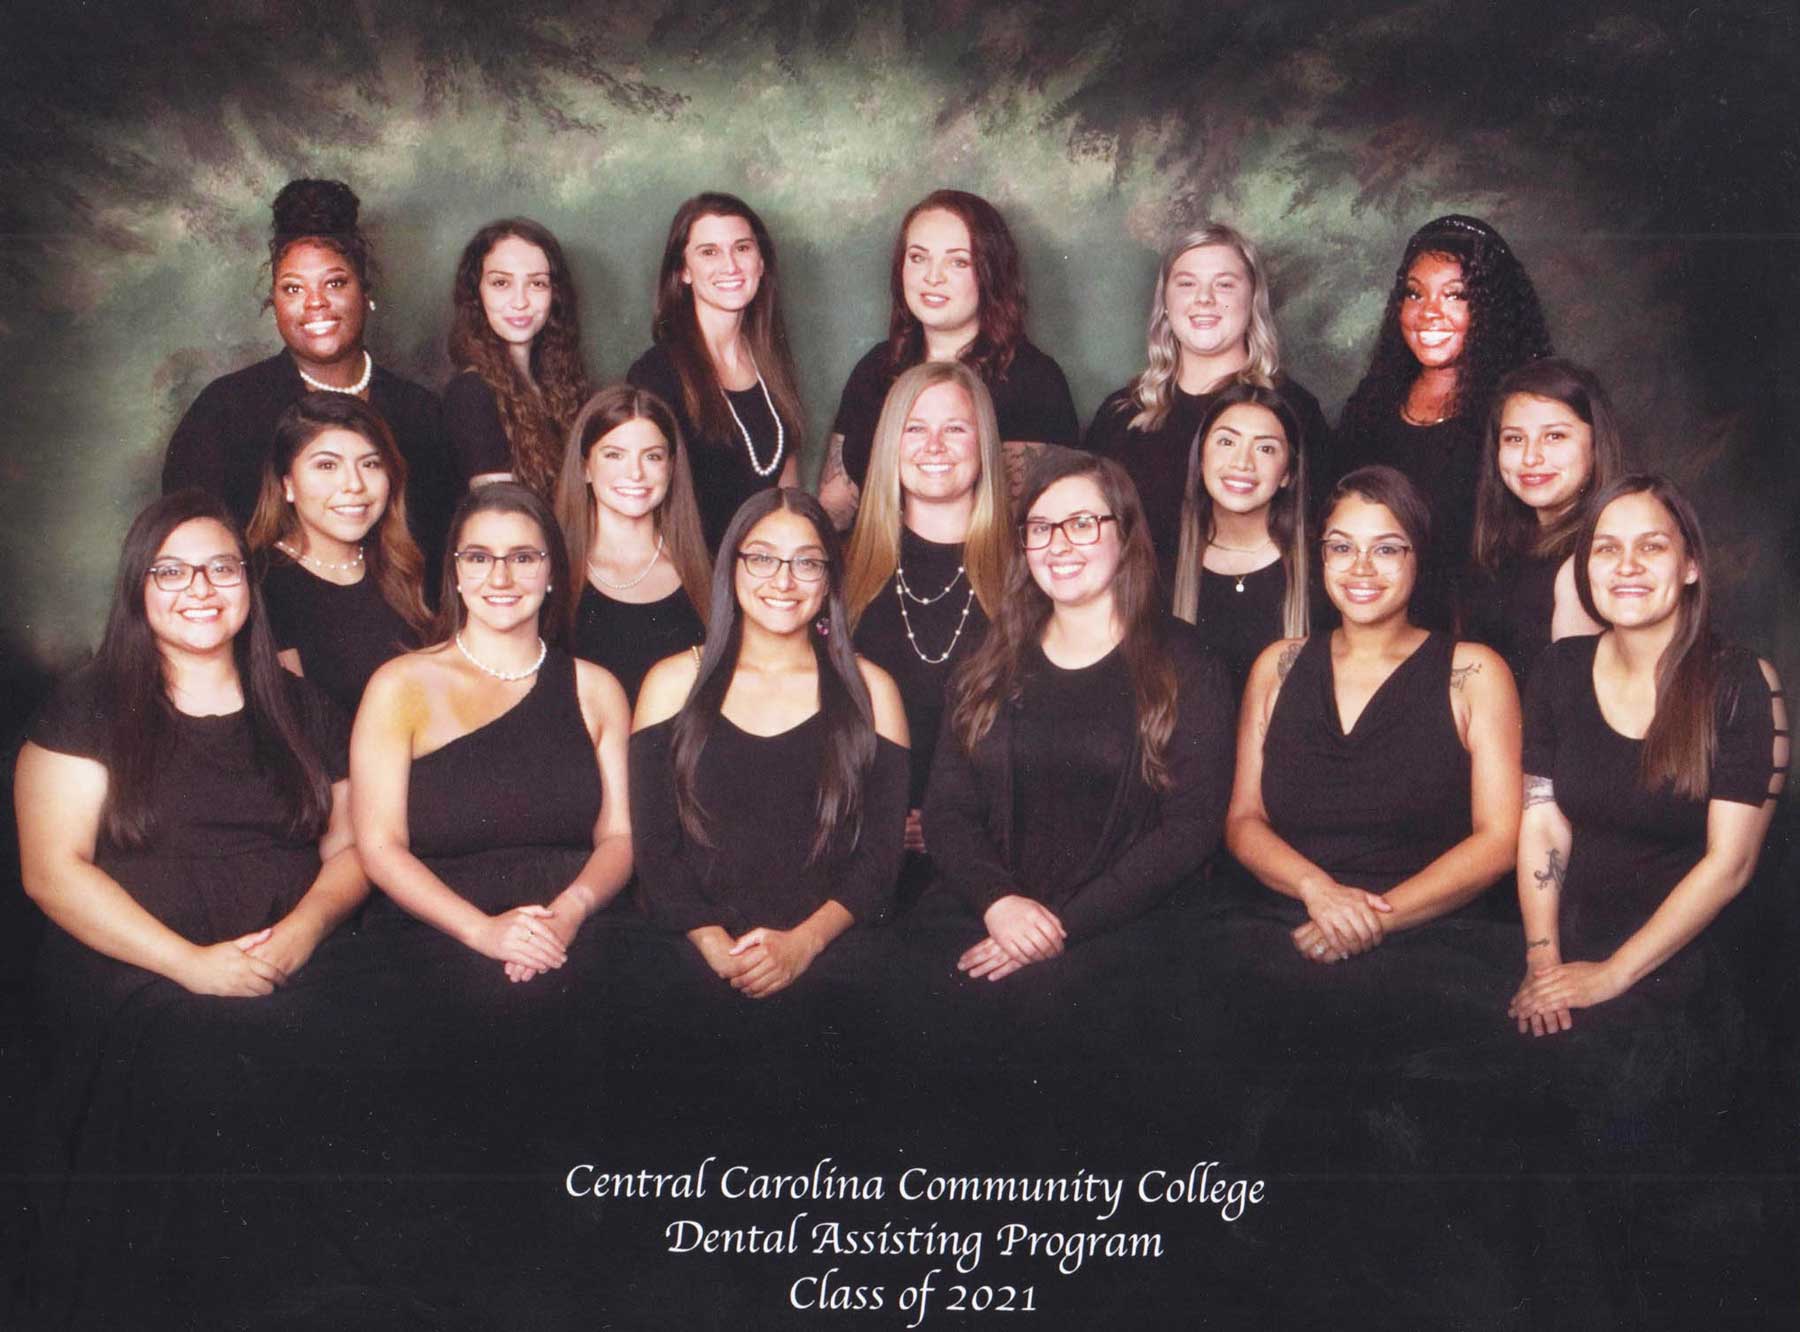 Read the full story, CCCC Dental Assisting Class of 2021